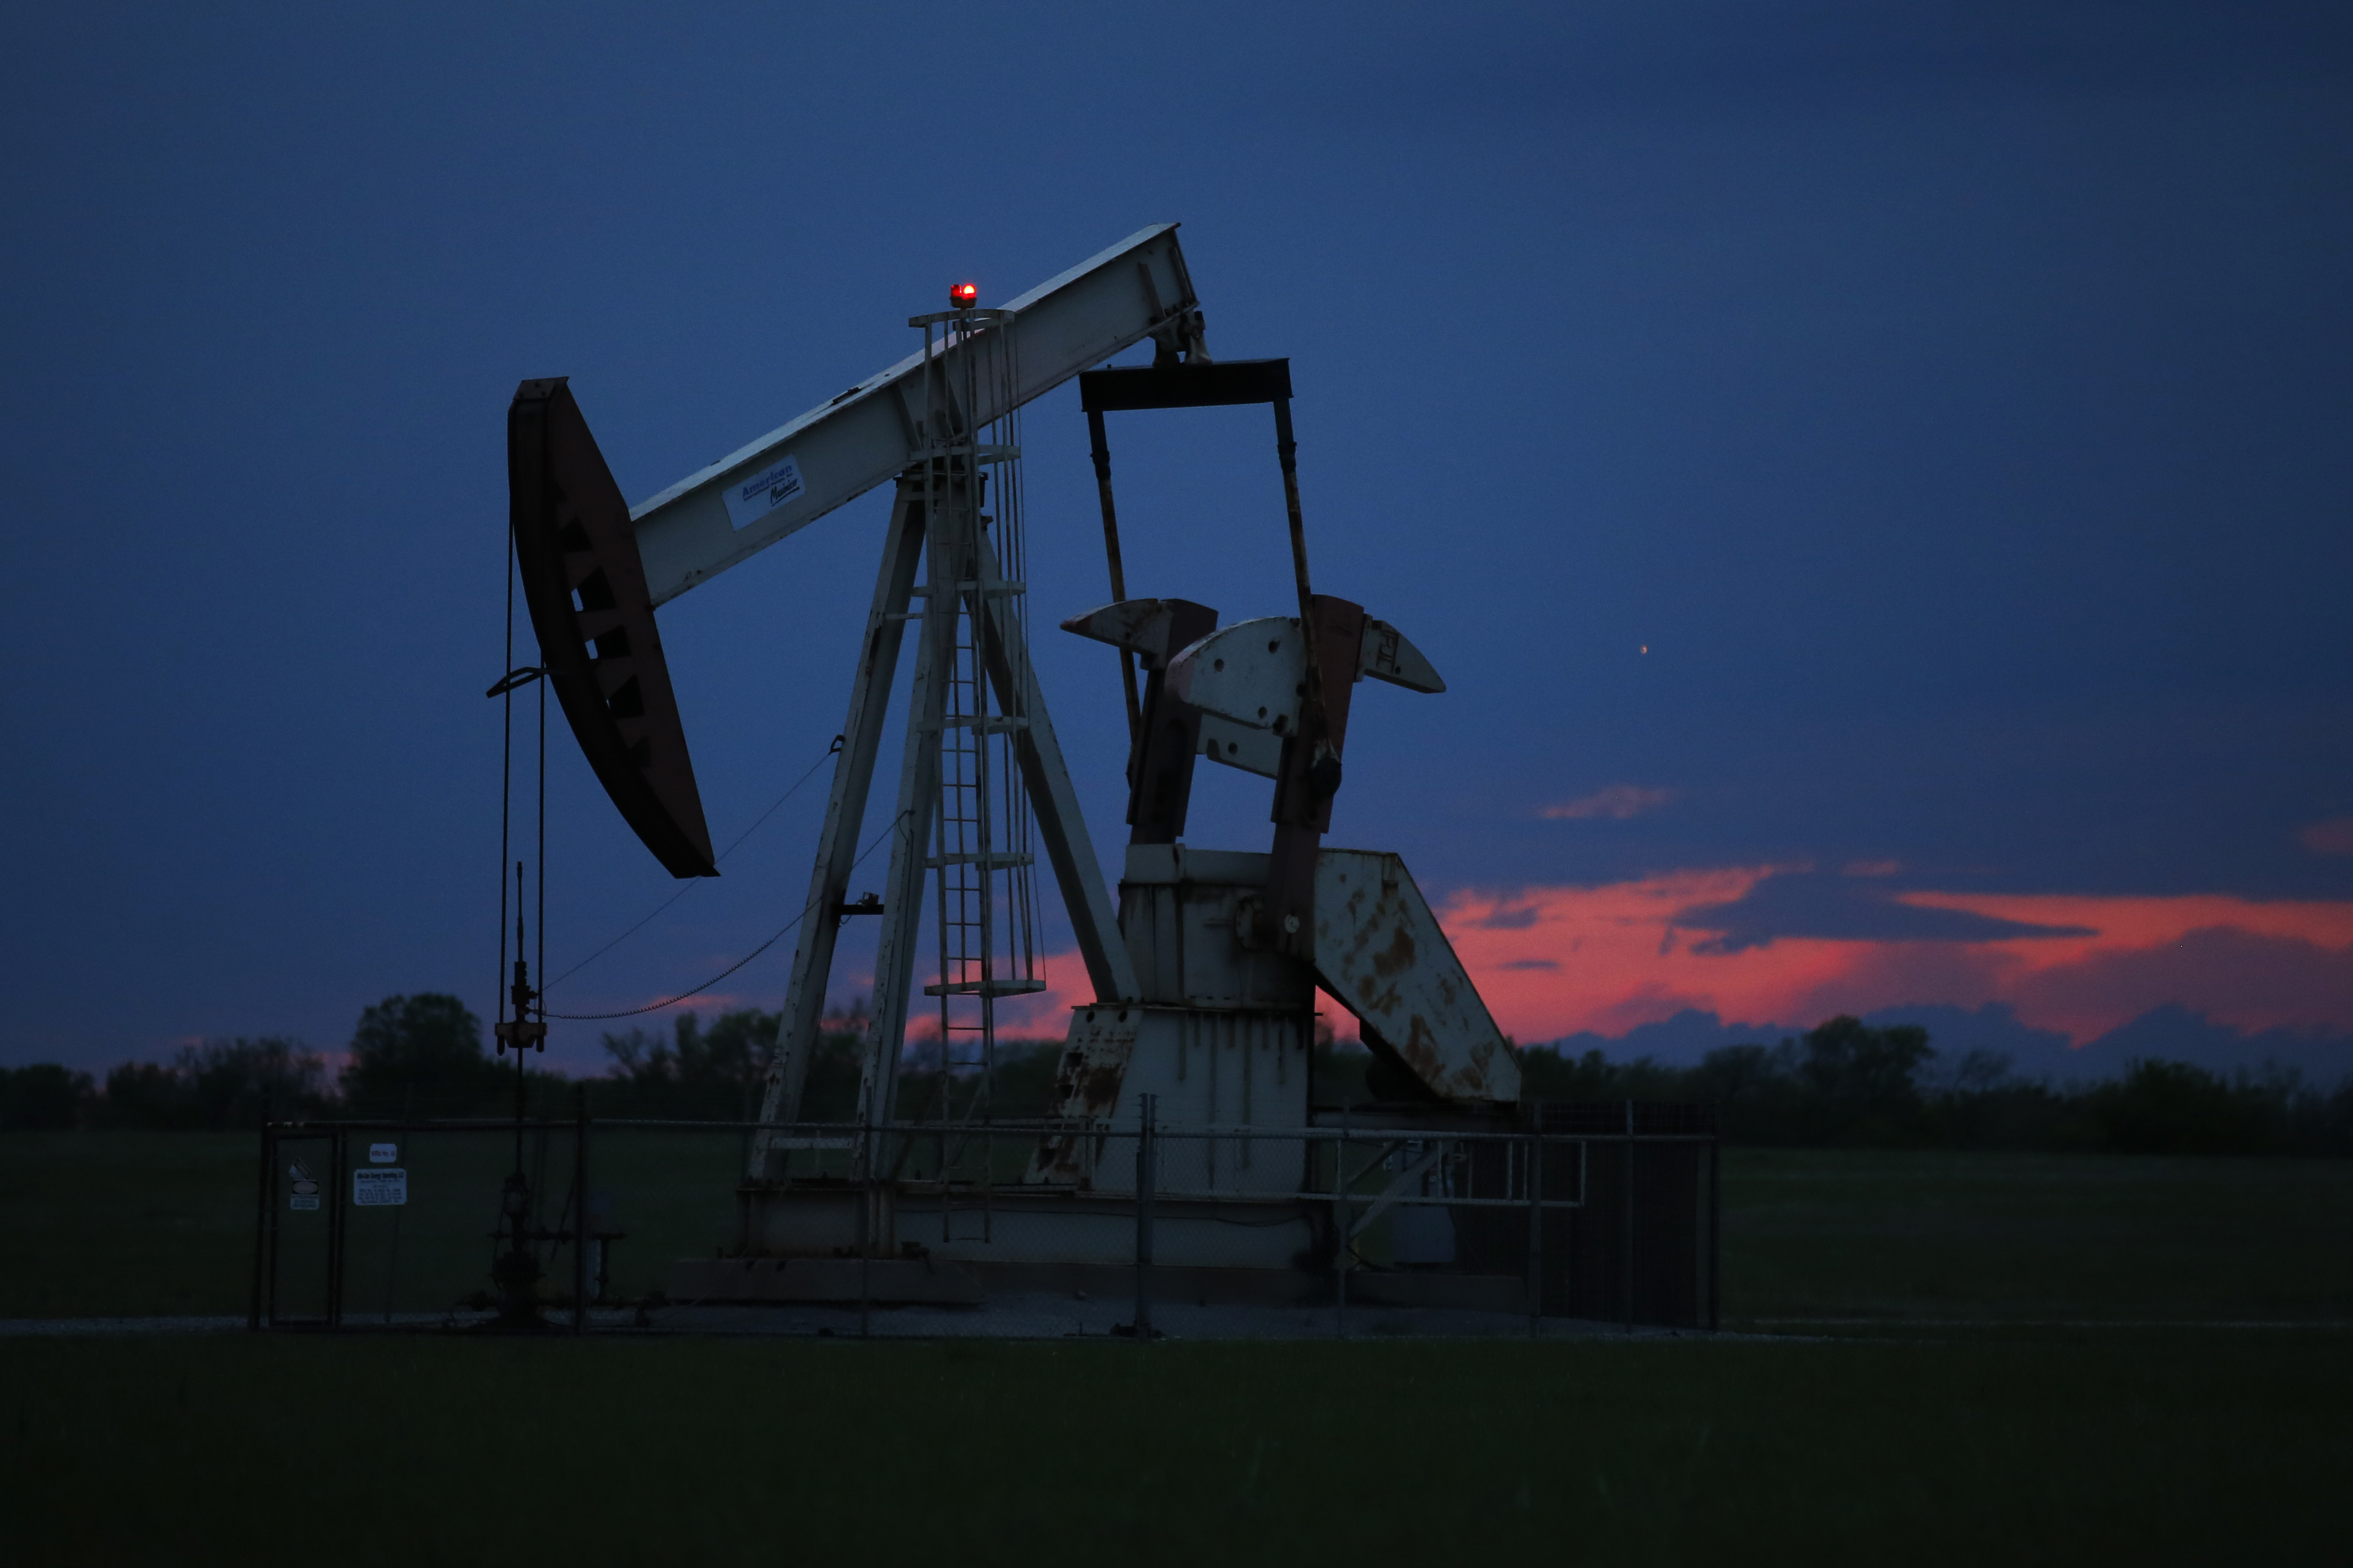 A pumpjack is pictured as the sun sets Tuesday, April 21, 2020, in Oklahoma City. Oil prices continue to drop, because very few people are flying or driving, and factories have shut amid widespread stay-at-home orders due to coronavirus concerns. (AP Photo/Sue Ogrocki)